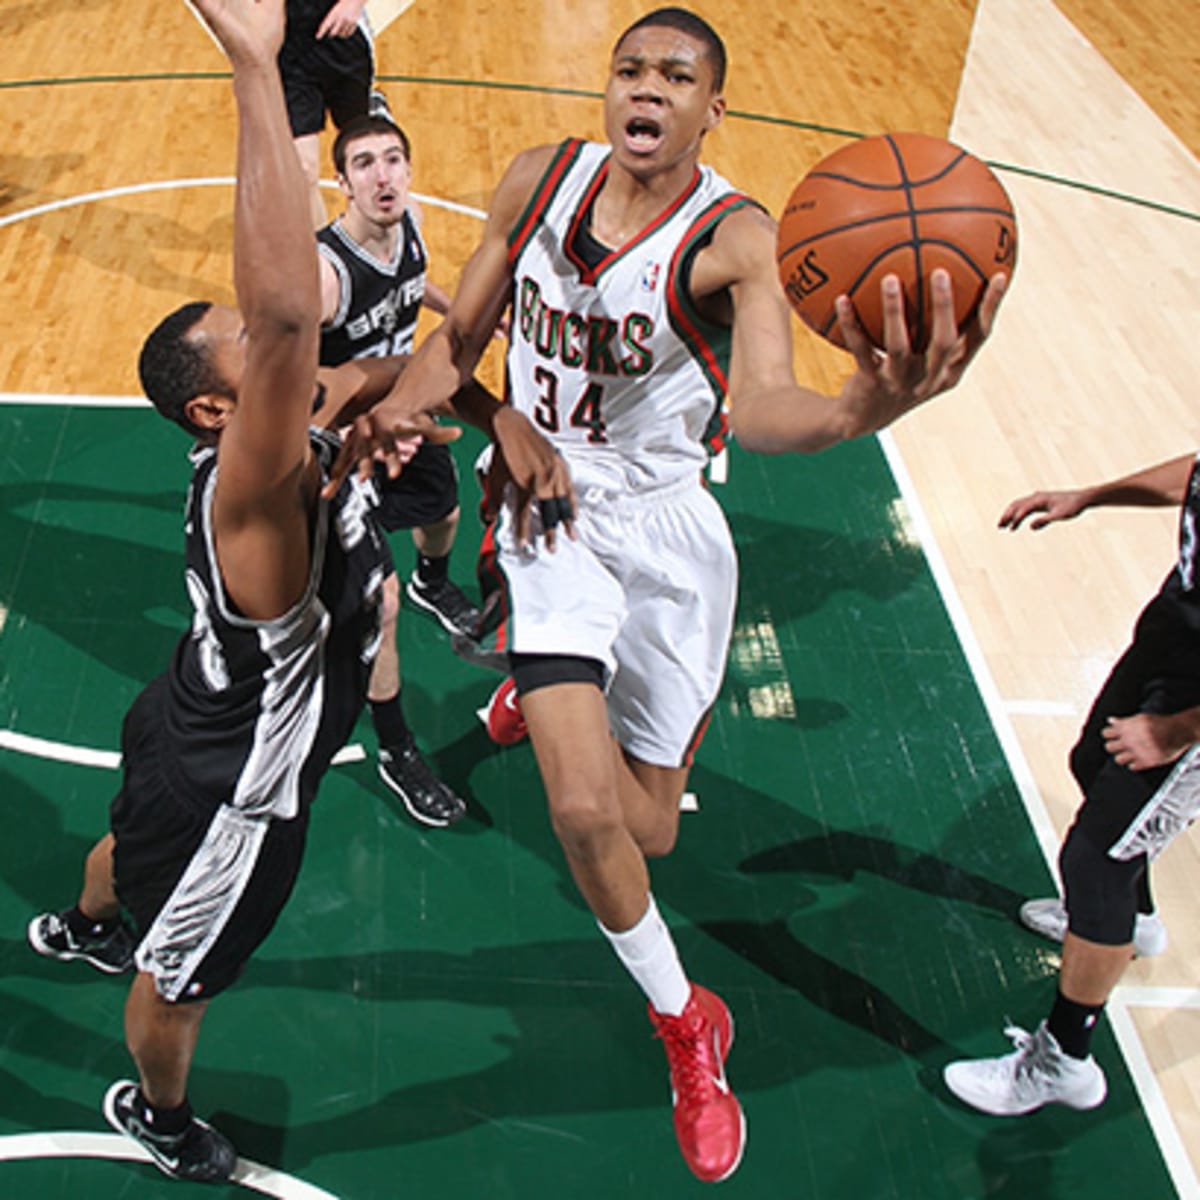 Giannis Antetokounmpo by Gary Dineen